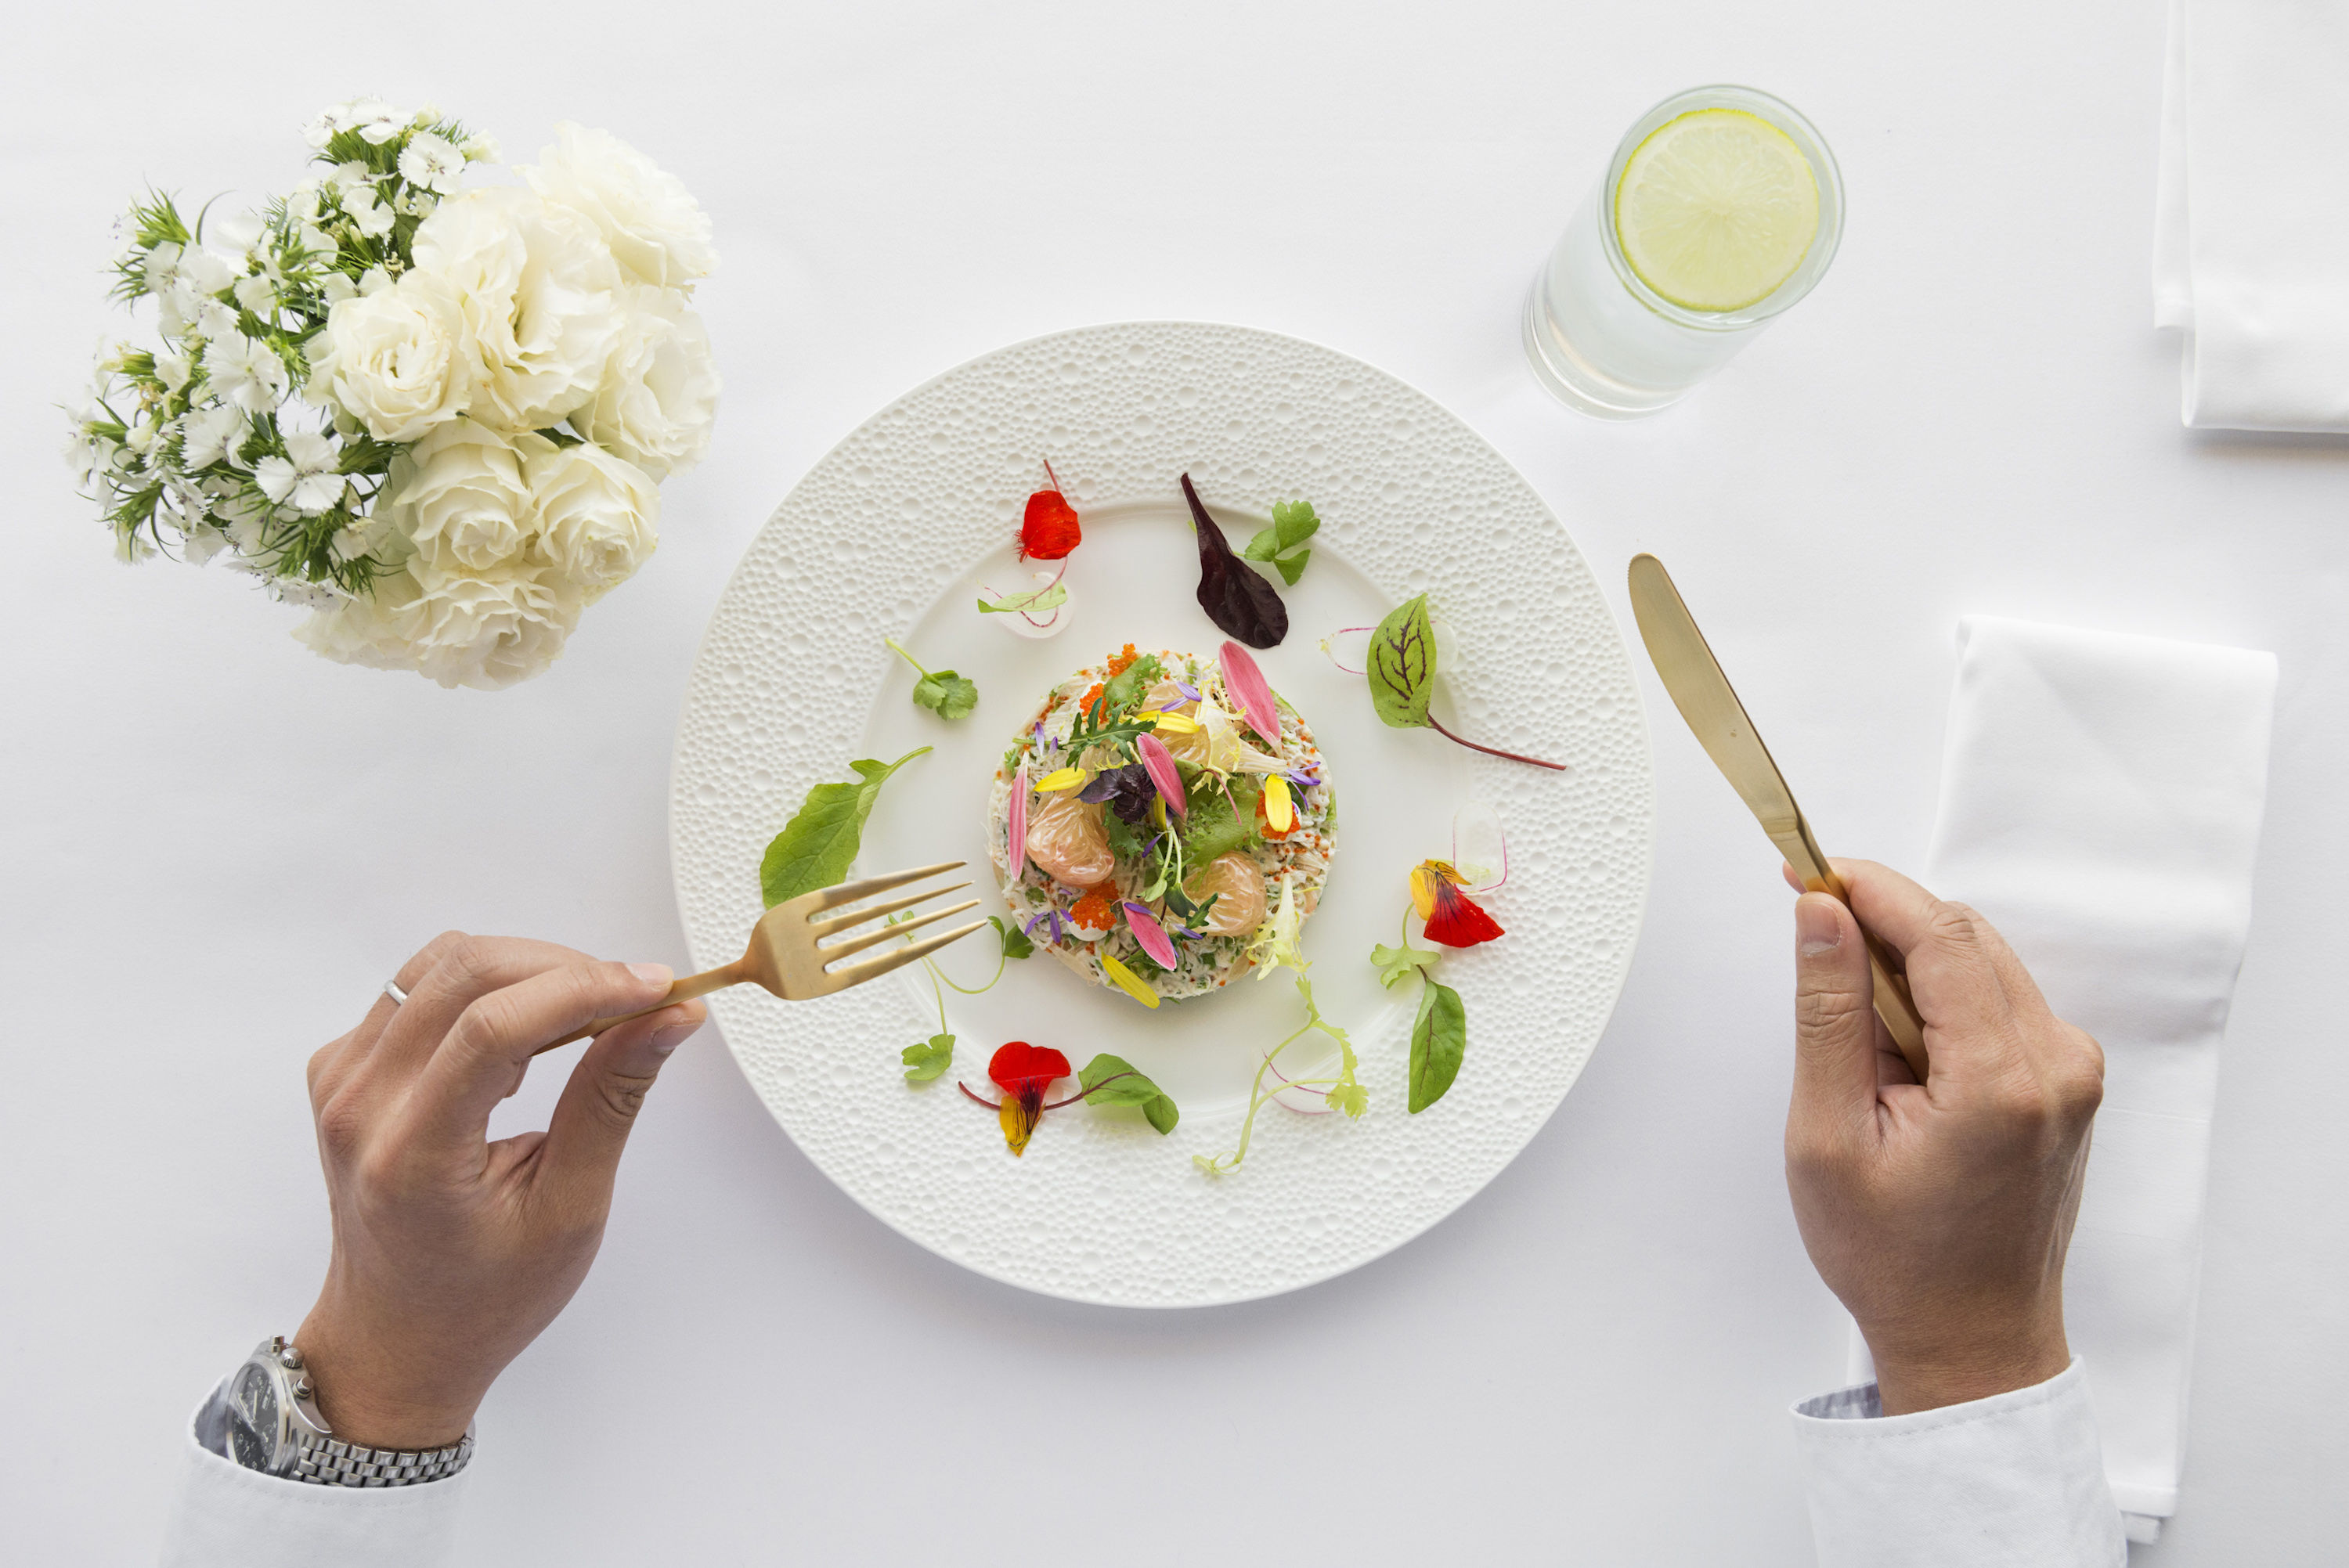 Take a seat at The Table with Shangri-La’s exclusive new food and drink programme